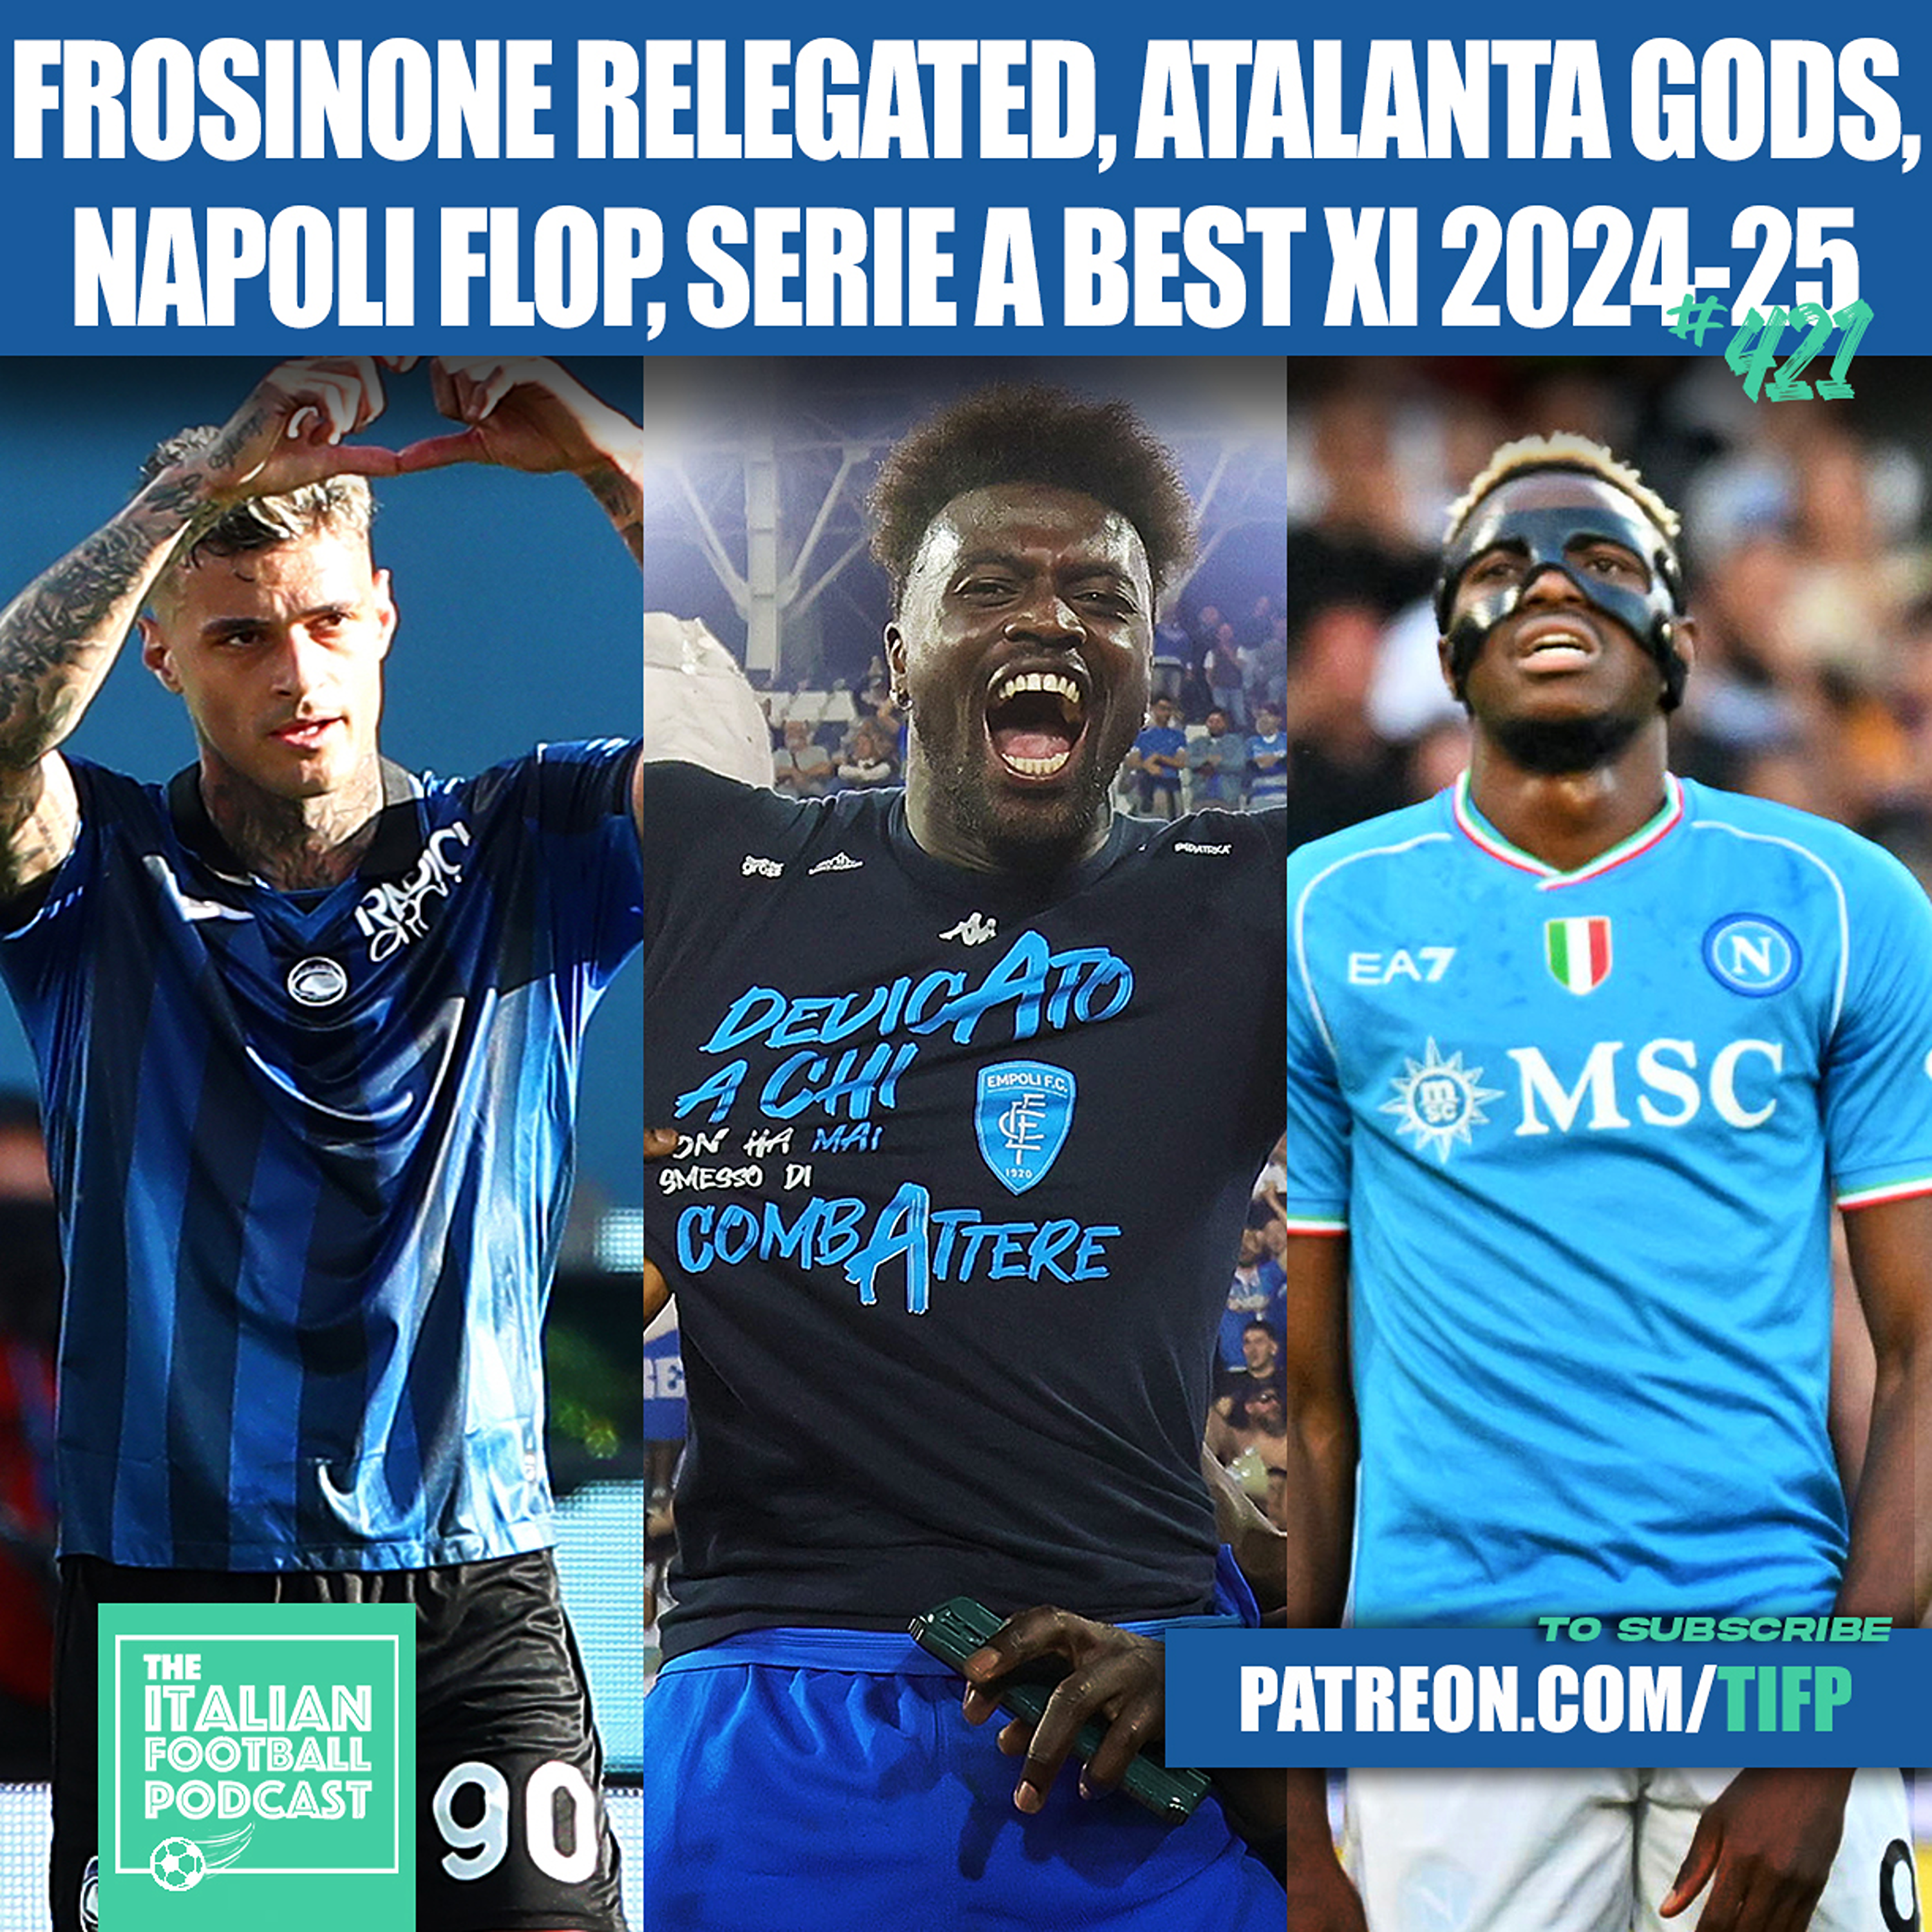 Free Monday Pod - Frosinone Relegated After Drama, Atalanta Gods, Napoli Flop, Serie A Best XI 2024-25 & Much More (Ep. 421)